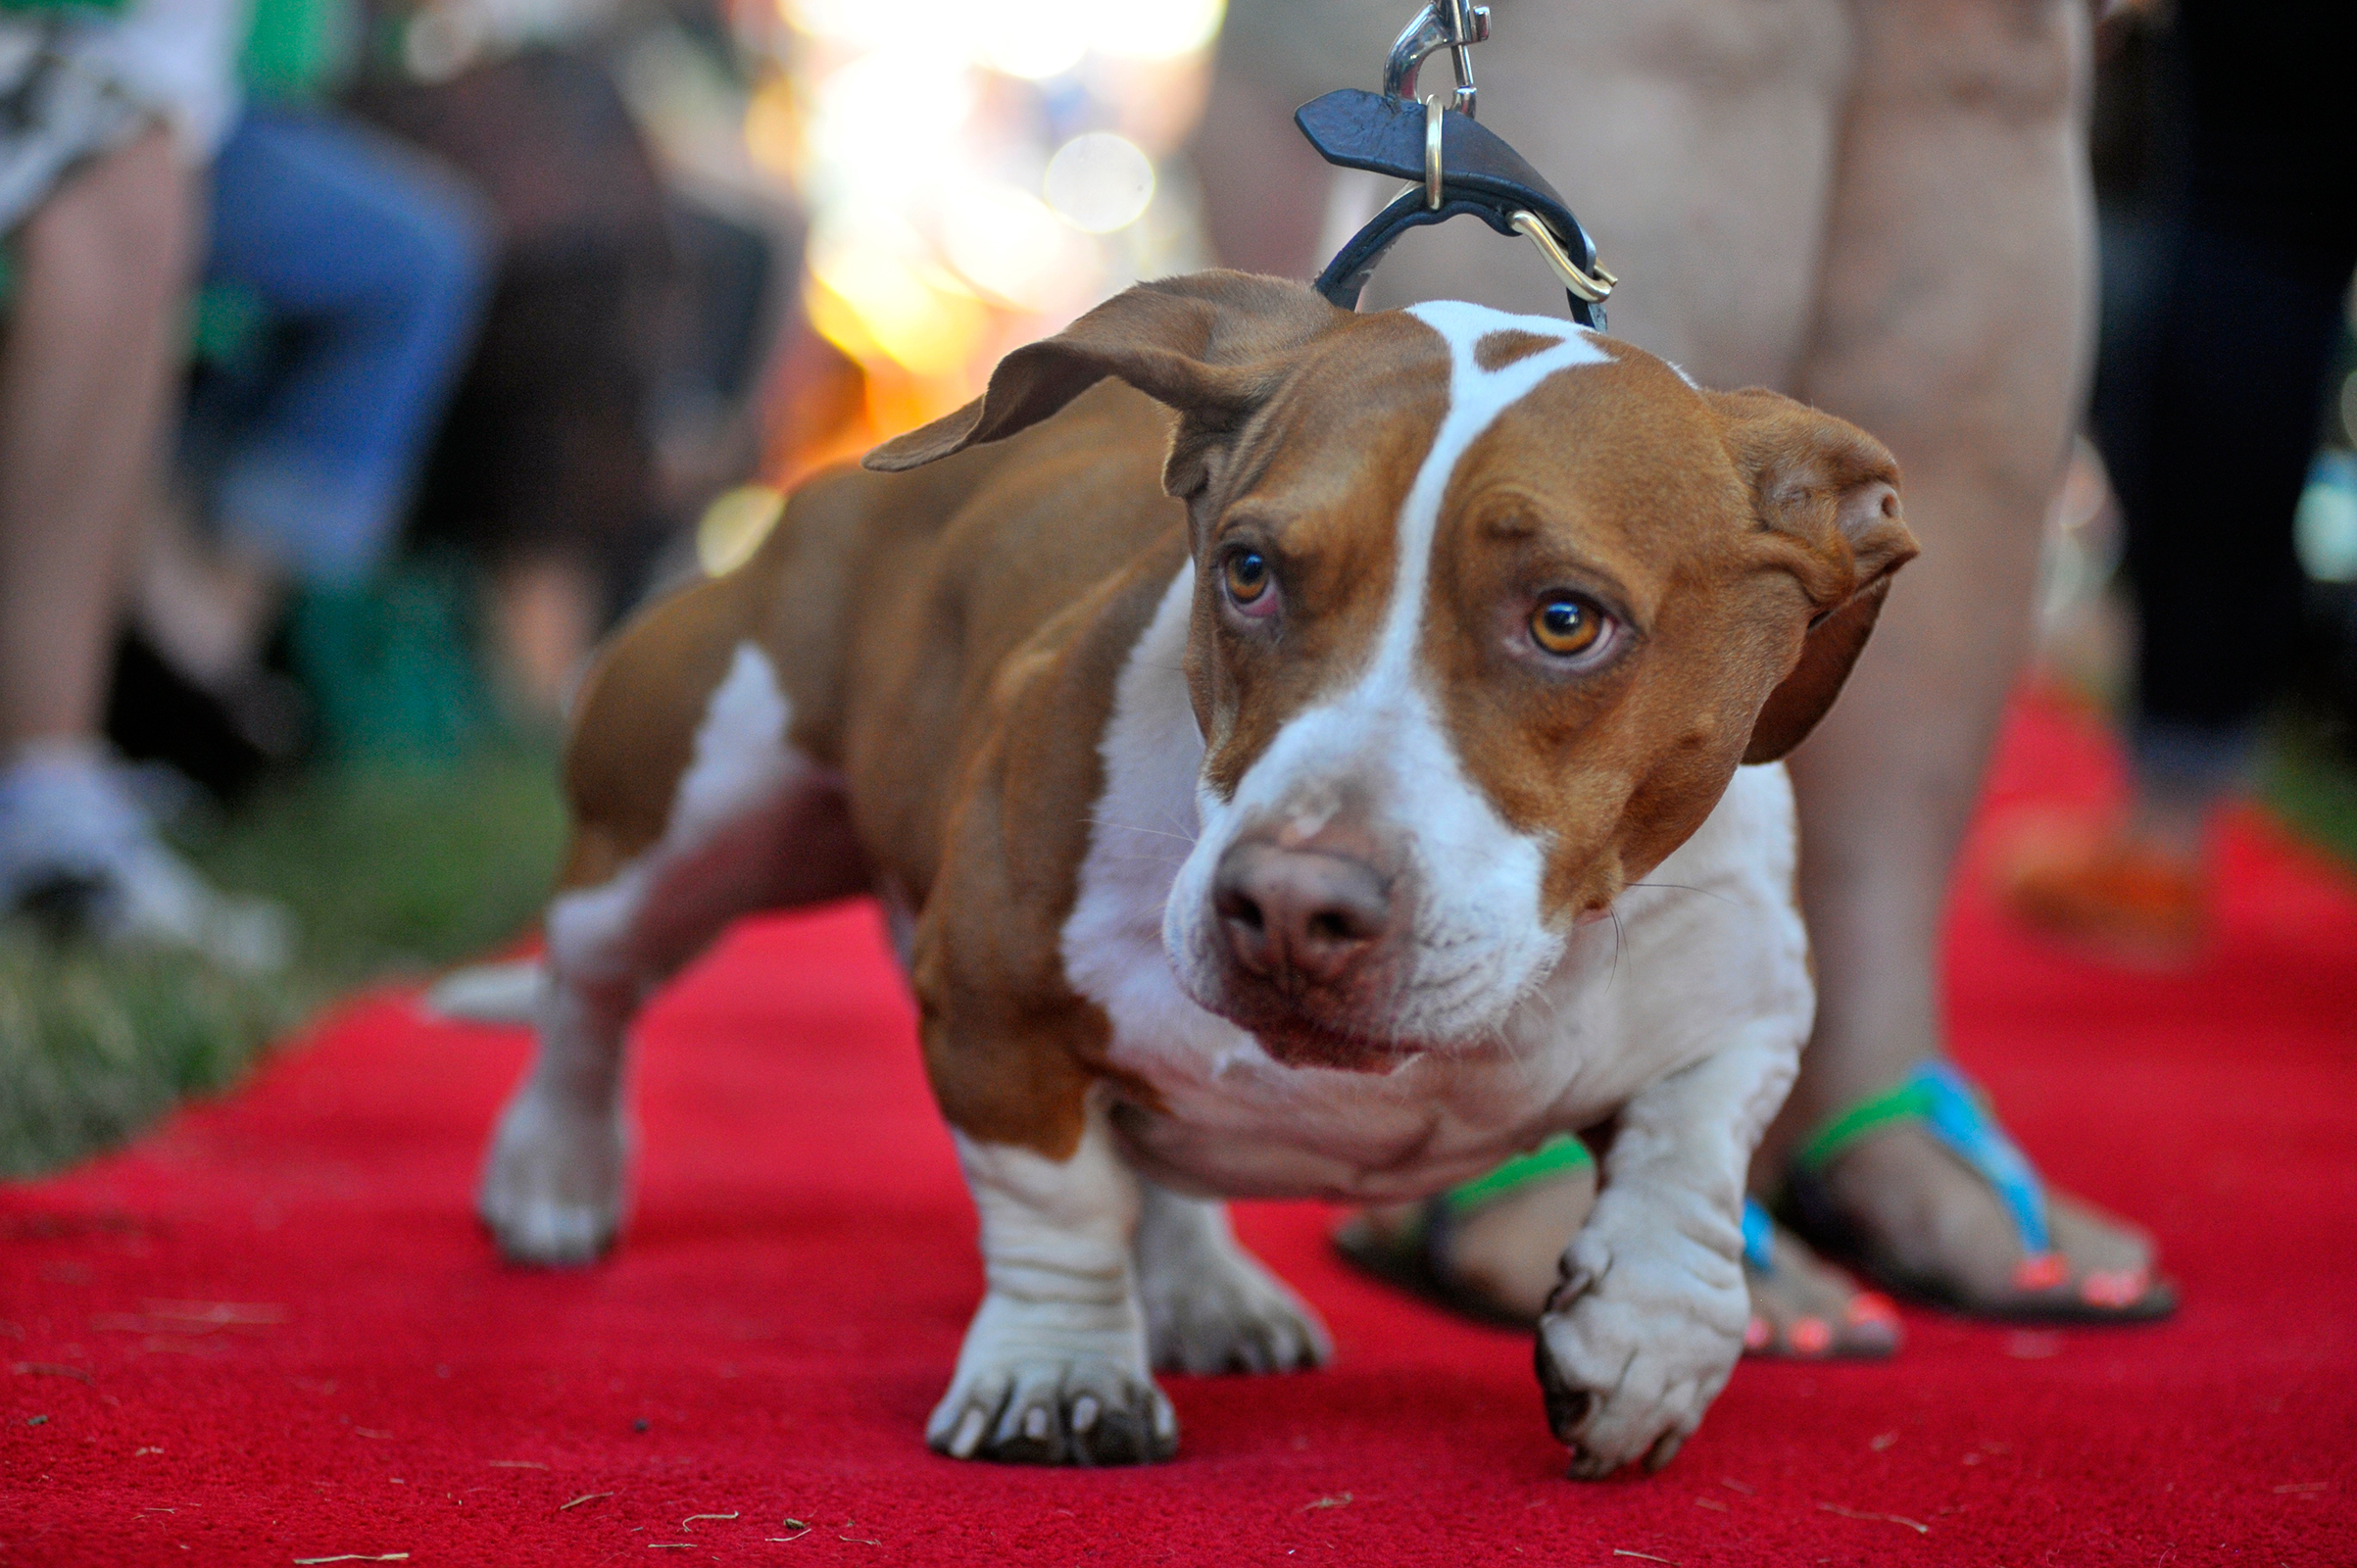 Walle, a Beagle-Basset, walks down the red carpet at the start of the World's Ugliest Dog competition in Petaluma, Calif., on June 21, 2013.